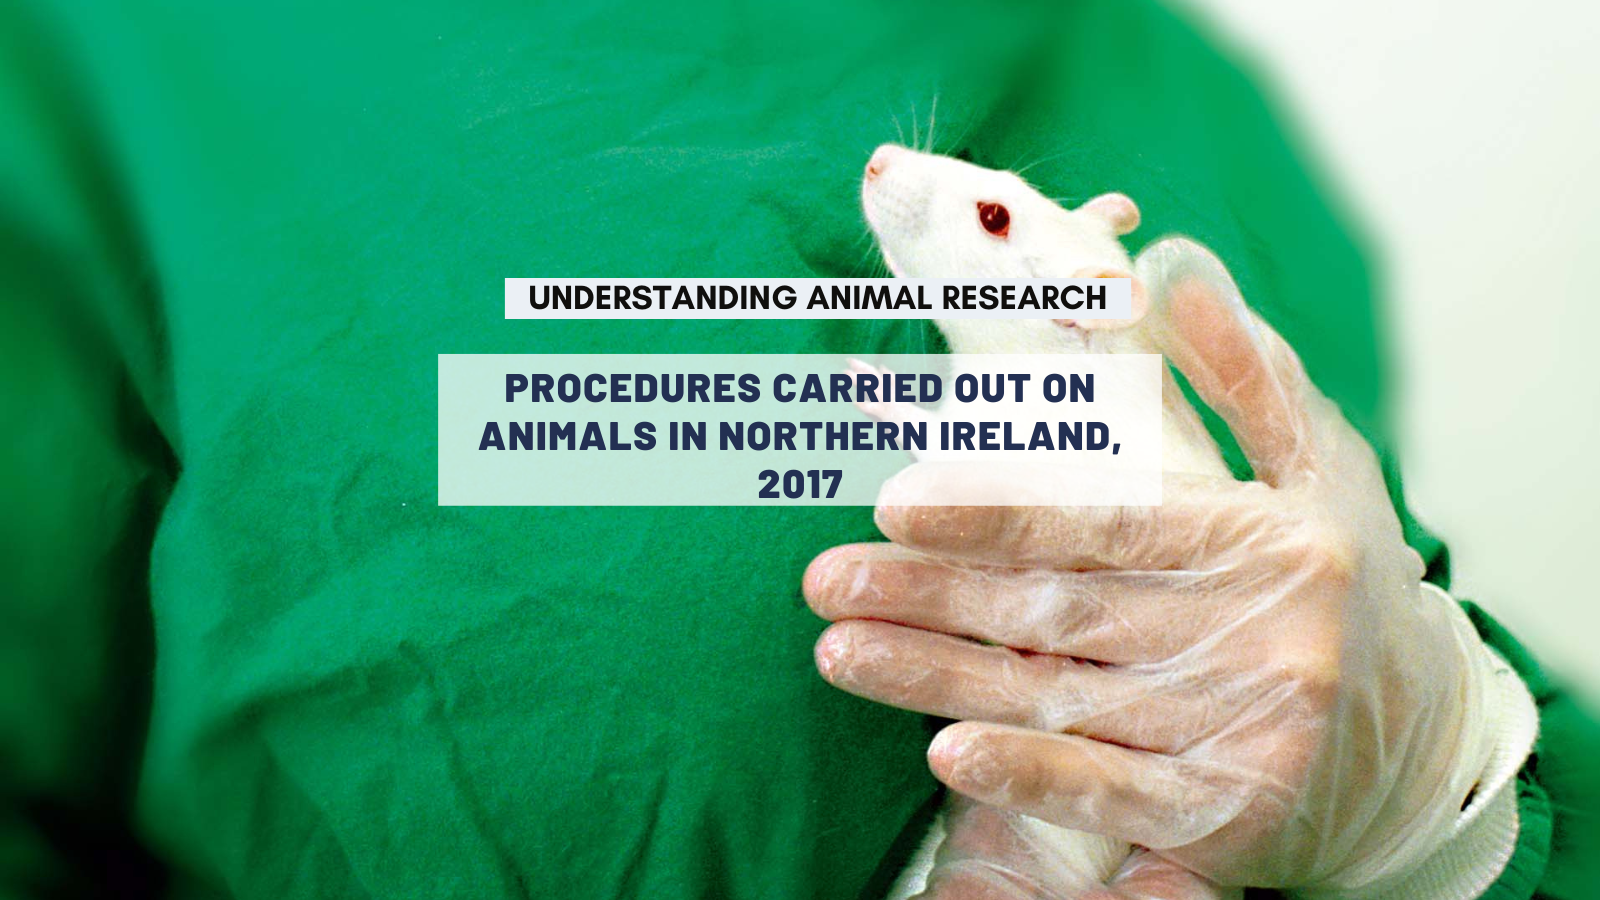 Procedures carried out on animals in Northern Ireland, 2017